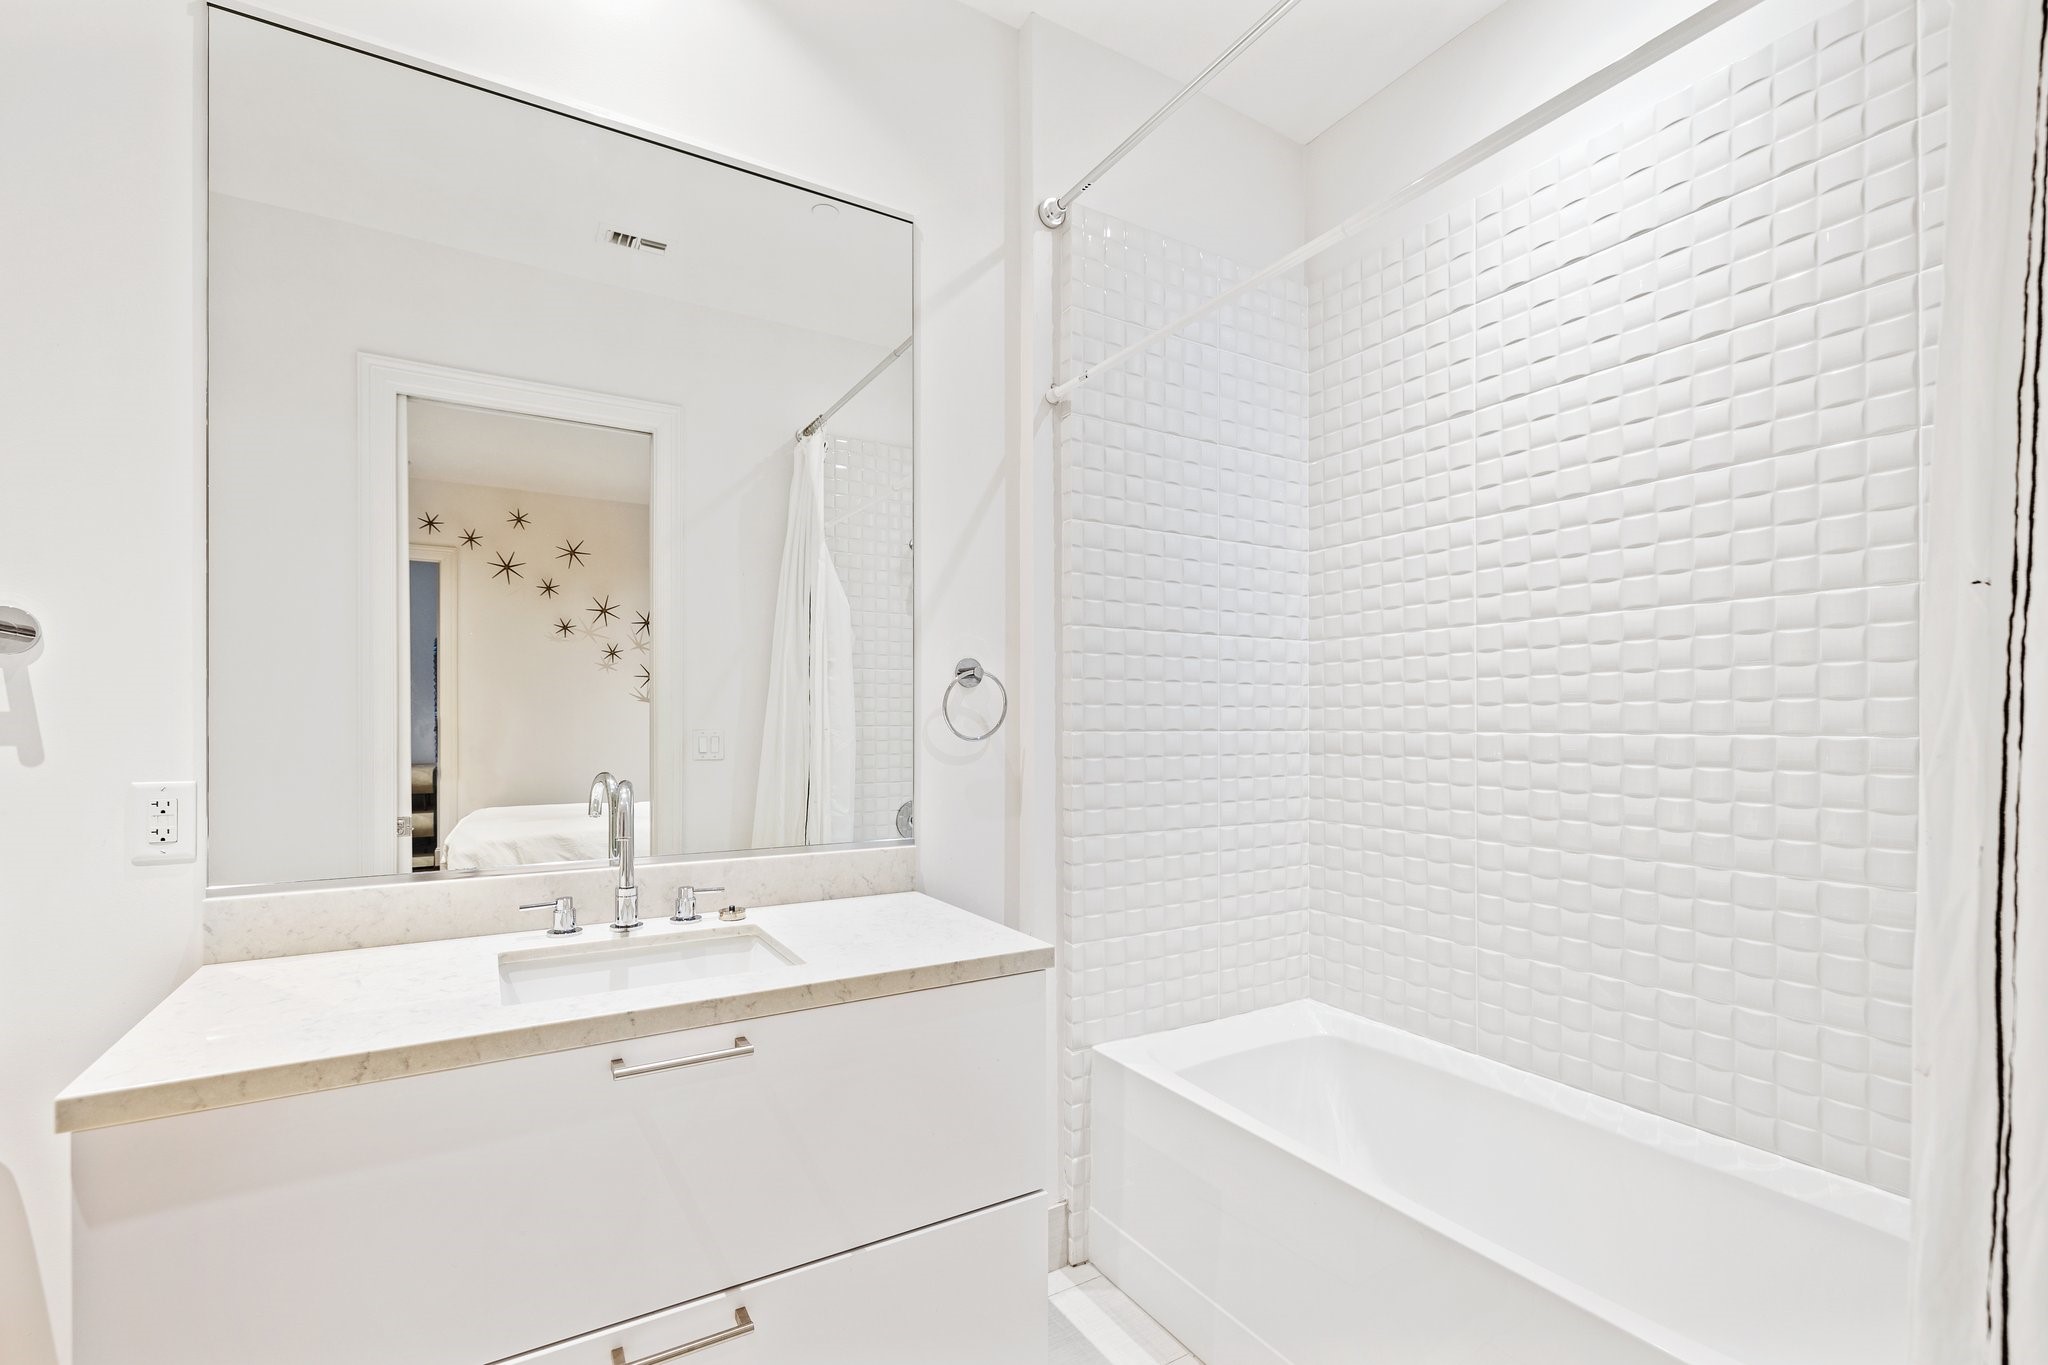 The 3rd bedroom's ensuite bathroom showcases modern elegance with a large mirror and a stone-topped vanity. The cube-tiled shower and bathtub combination offers both function and relaxation in a pristine setting.